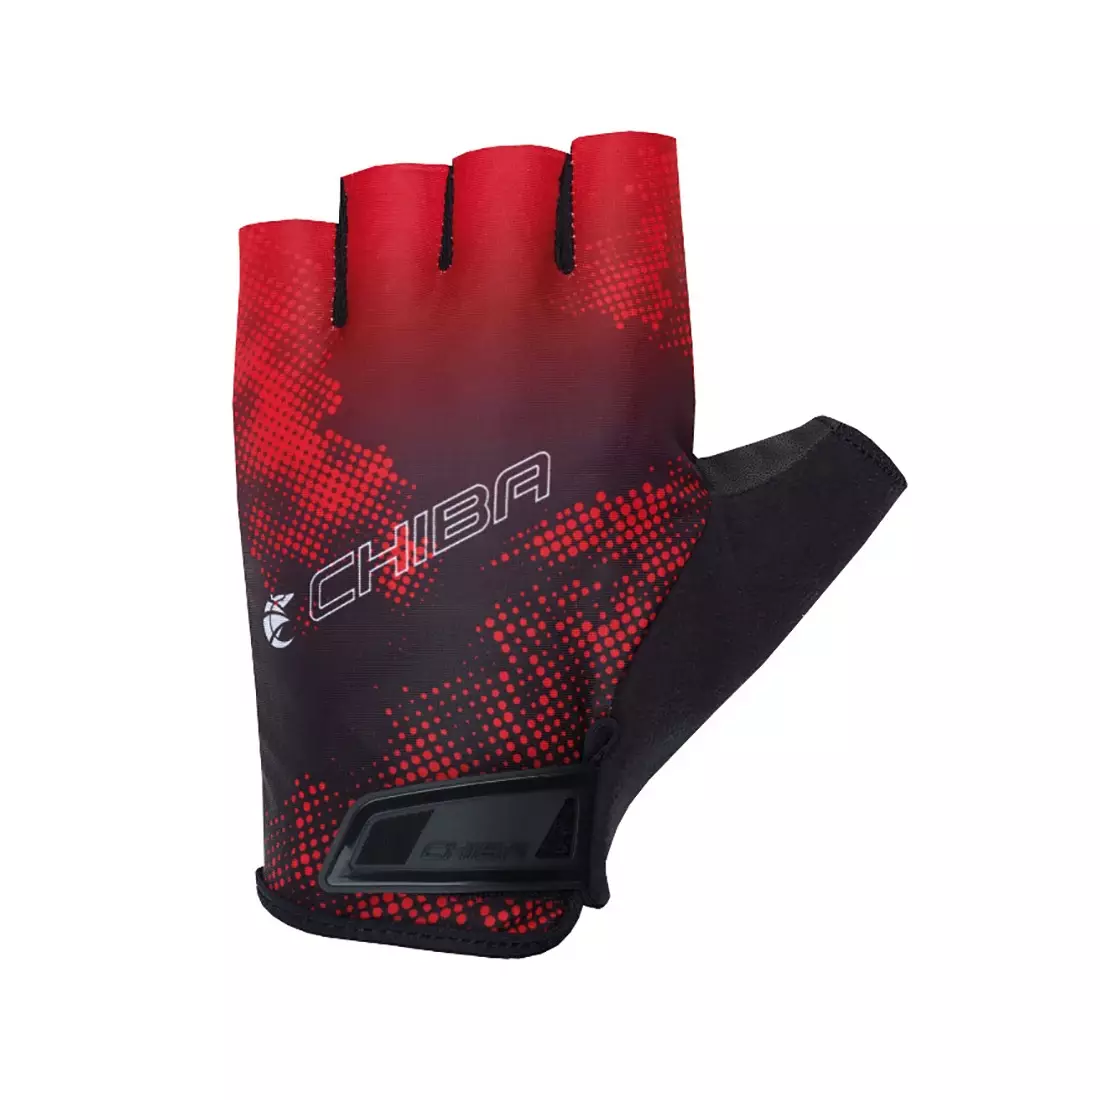 CHIBA cycling gloves RIDE II red 3040618